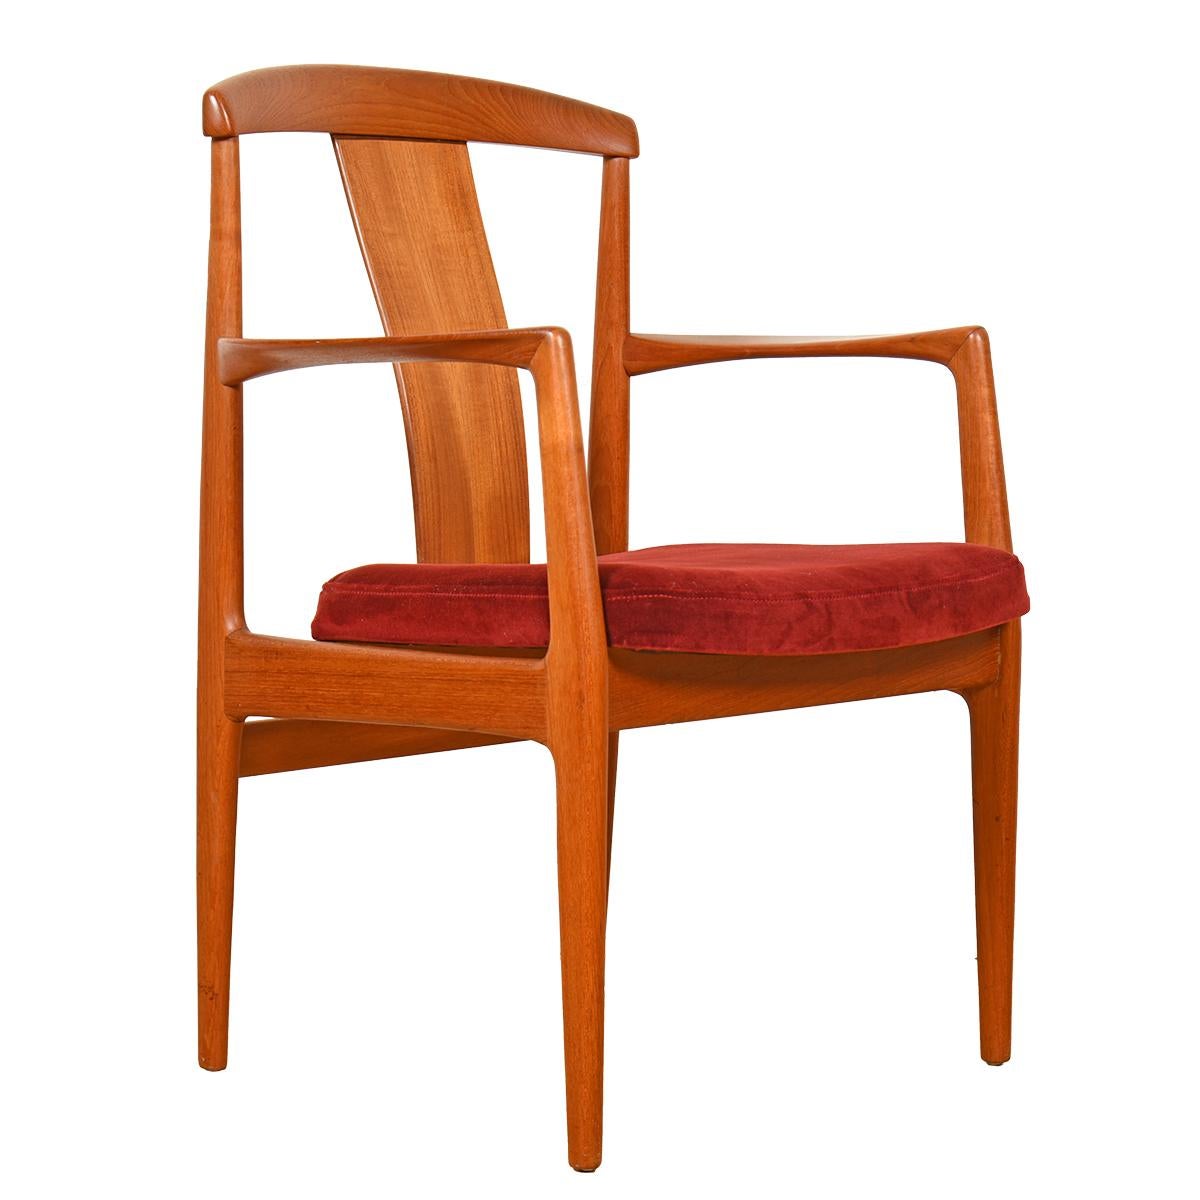 Set of 6 Swedish Modern Teak Dining Chairs by Folke Ohlsson for DUX In Good Condition For Sale In Kensington, MD